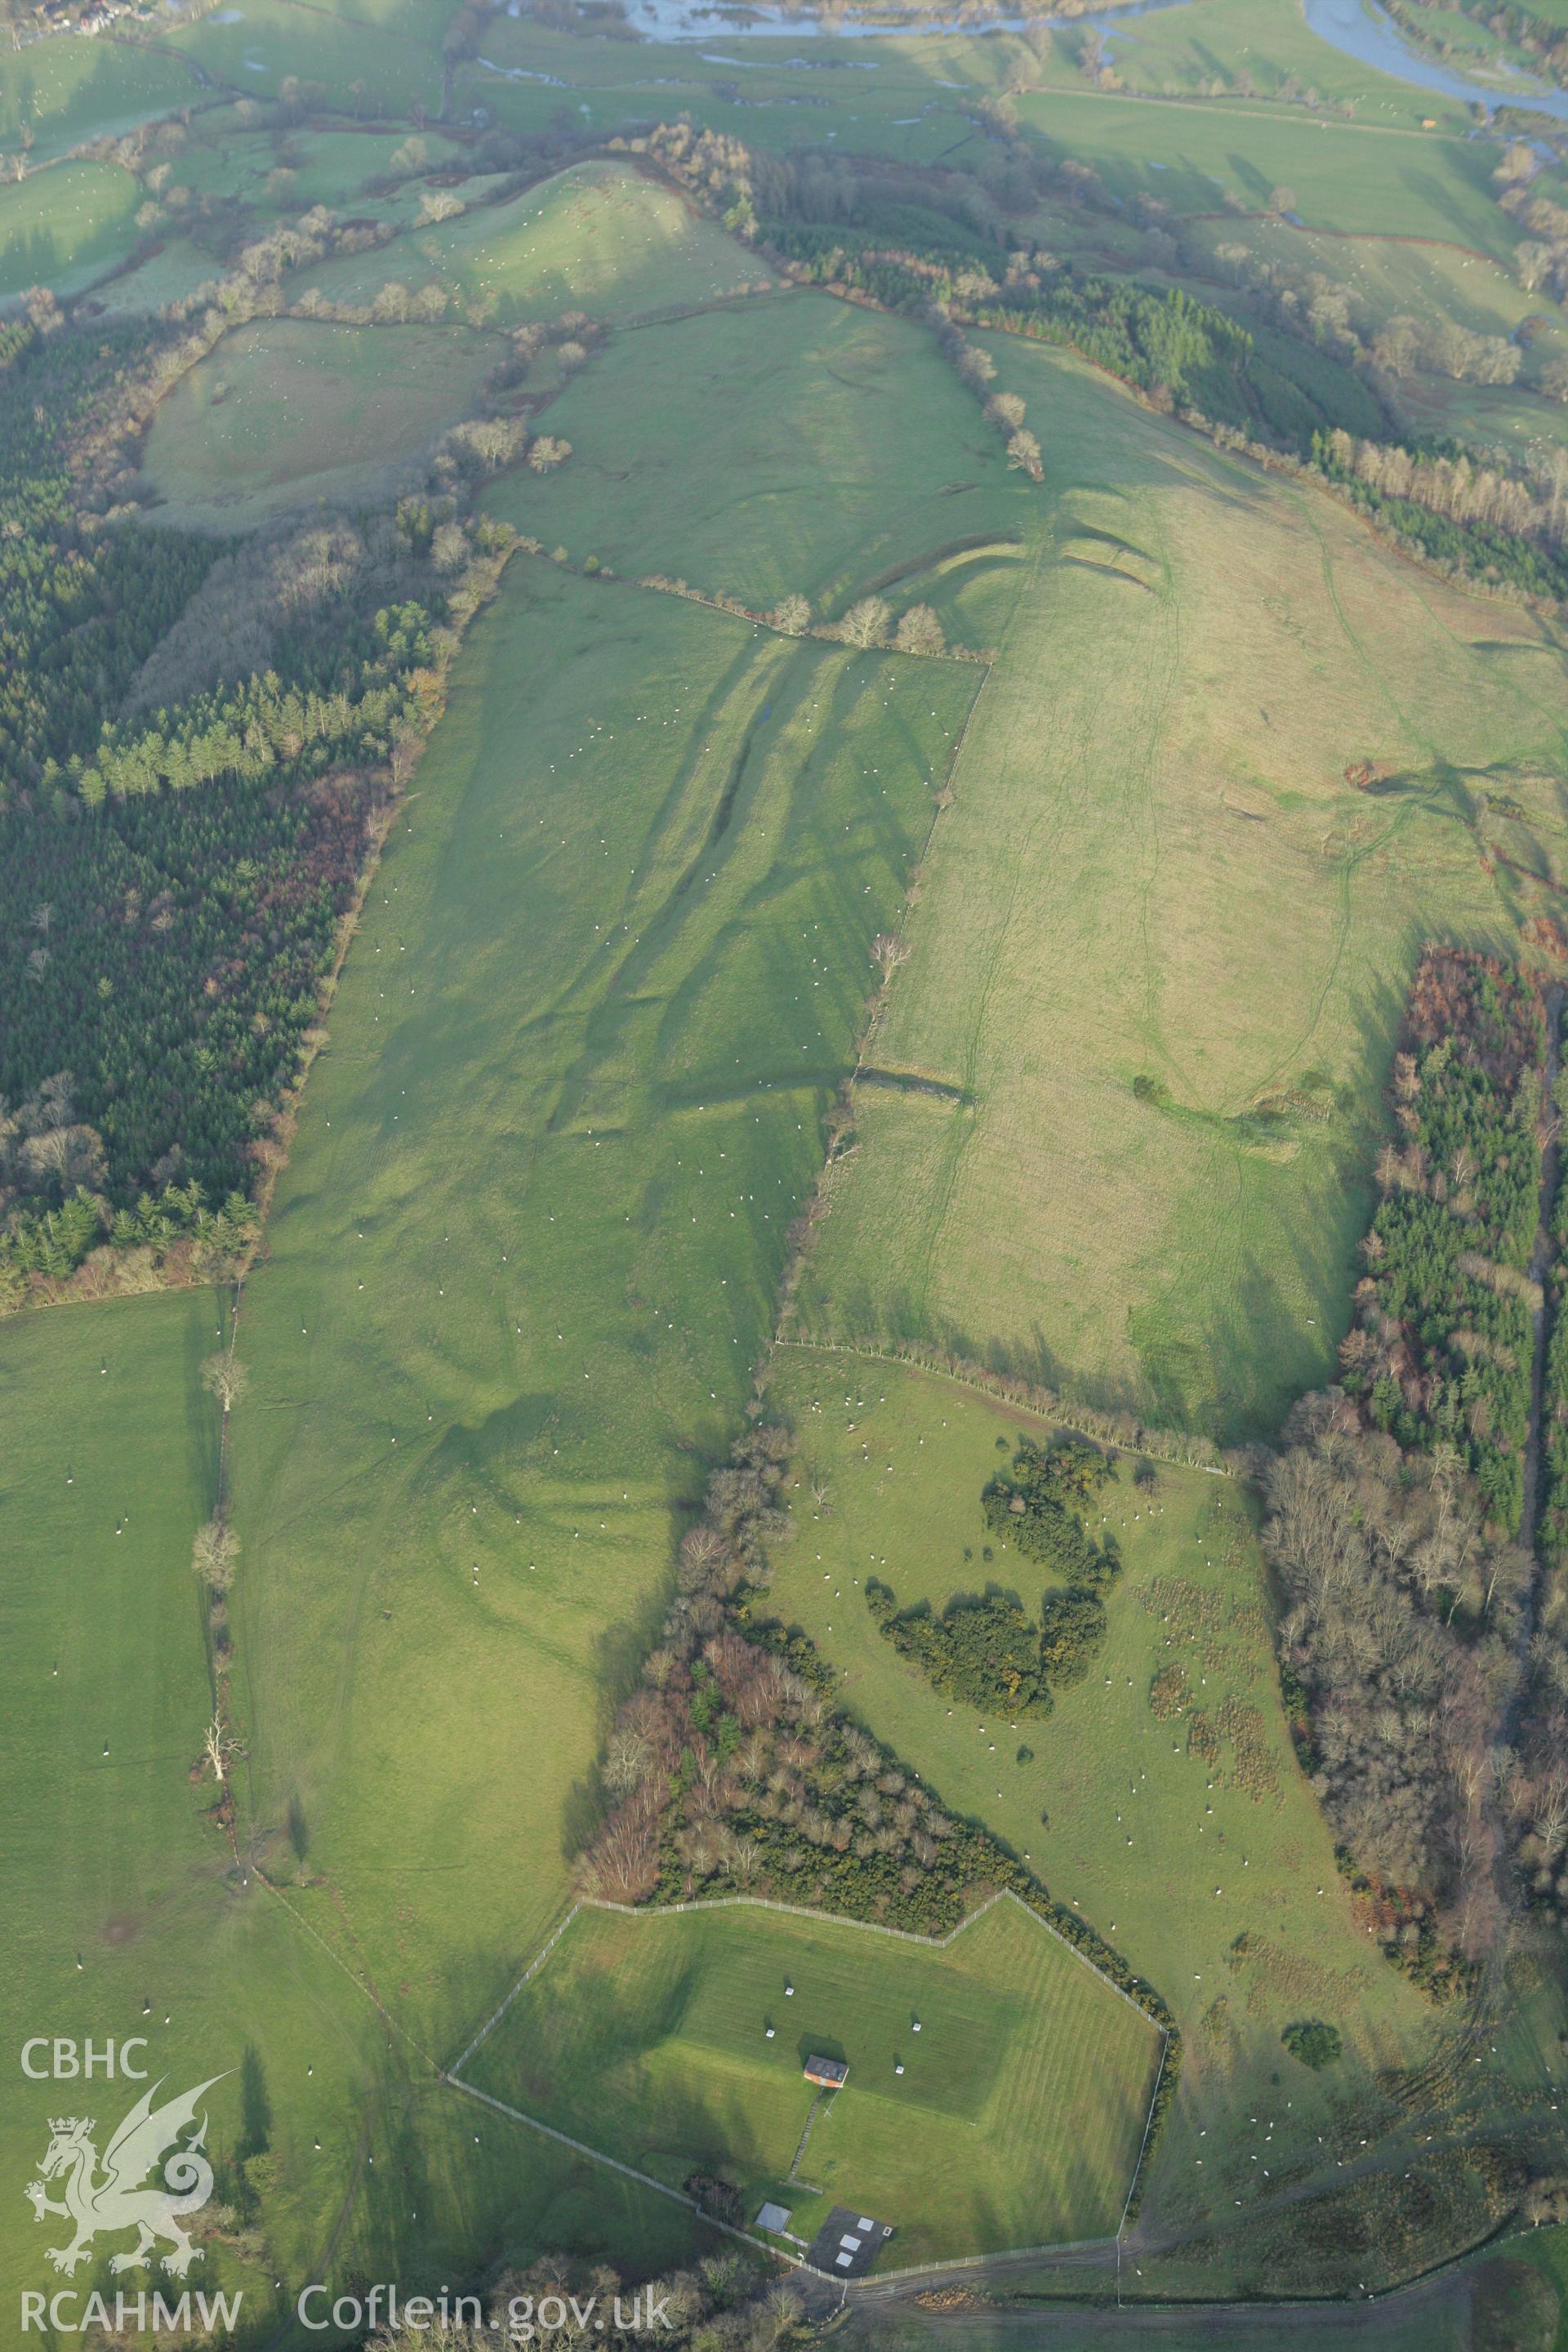 RCAHMW colour oblique photograph of Cefncarnedd Iron Age hillfort. Taken by Toby Driver on 11/12/2007.